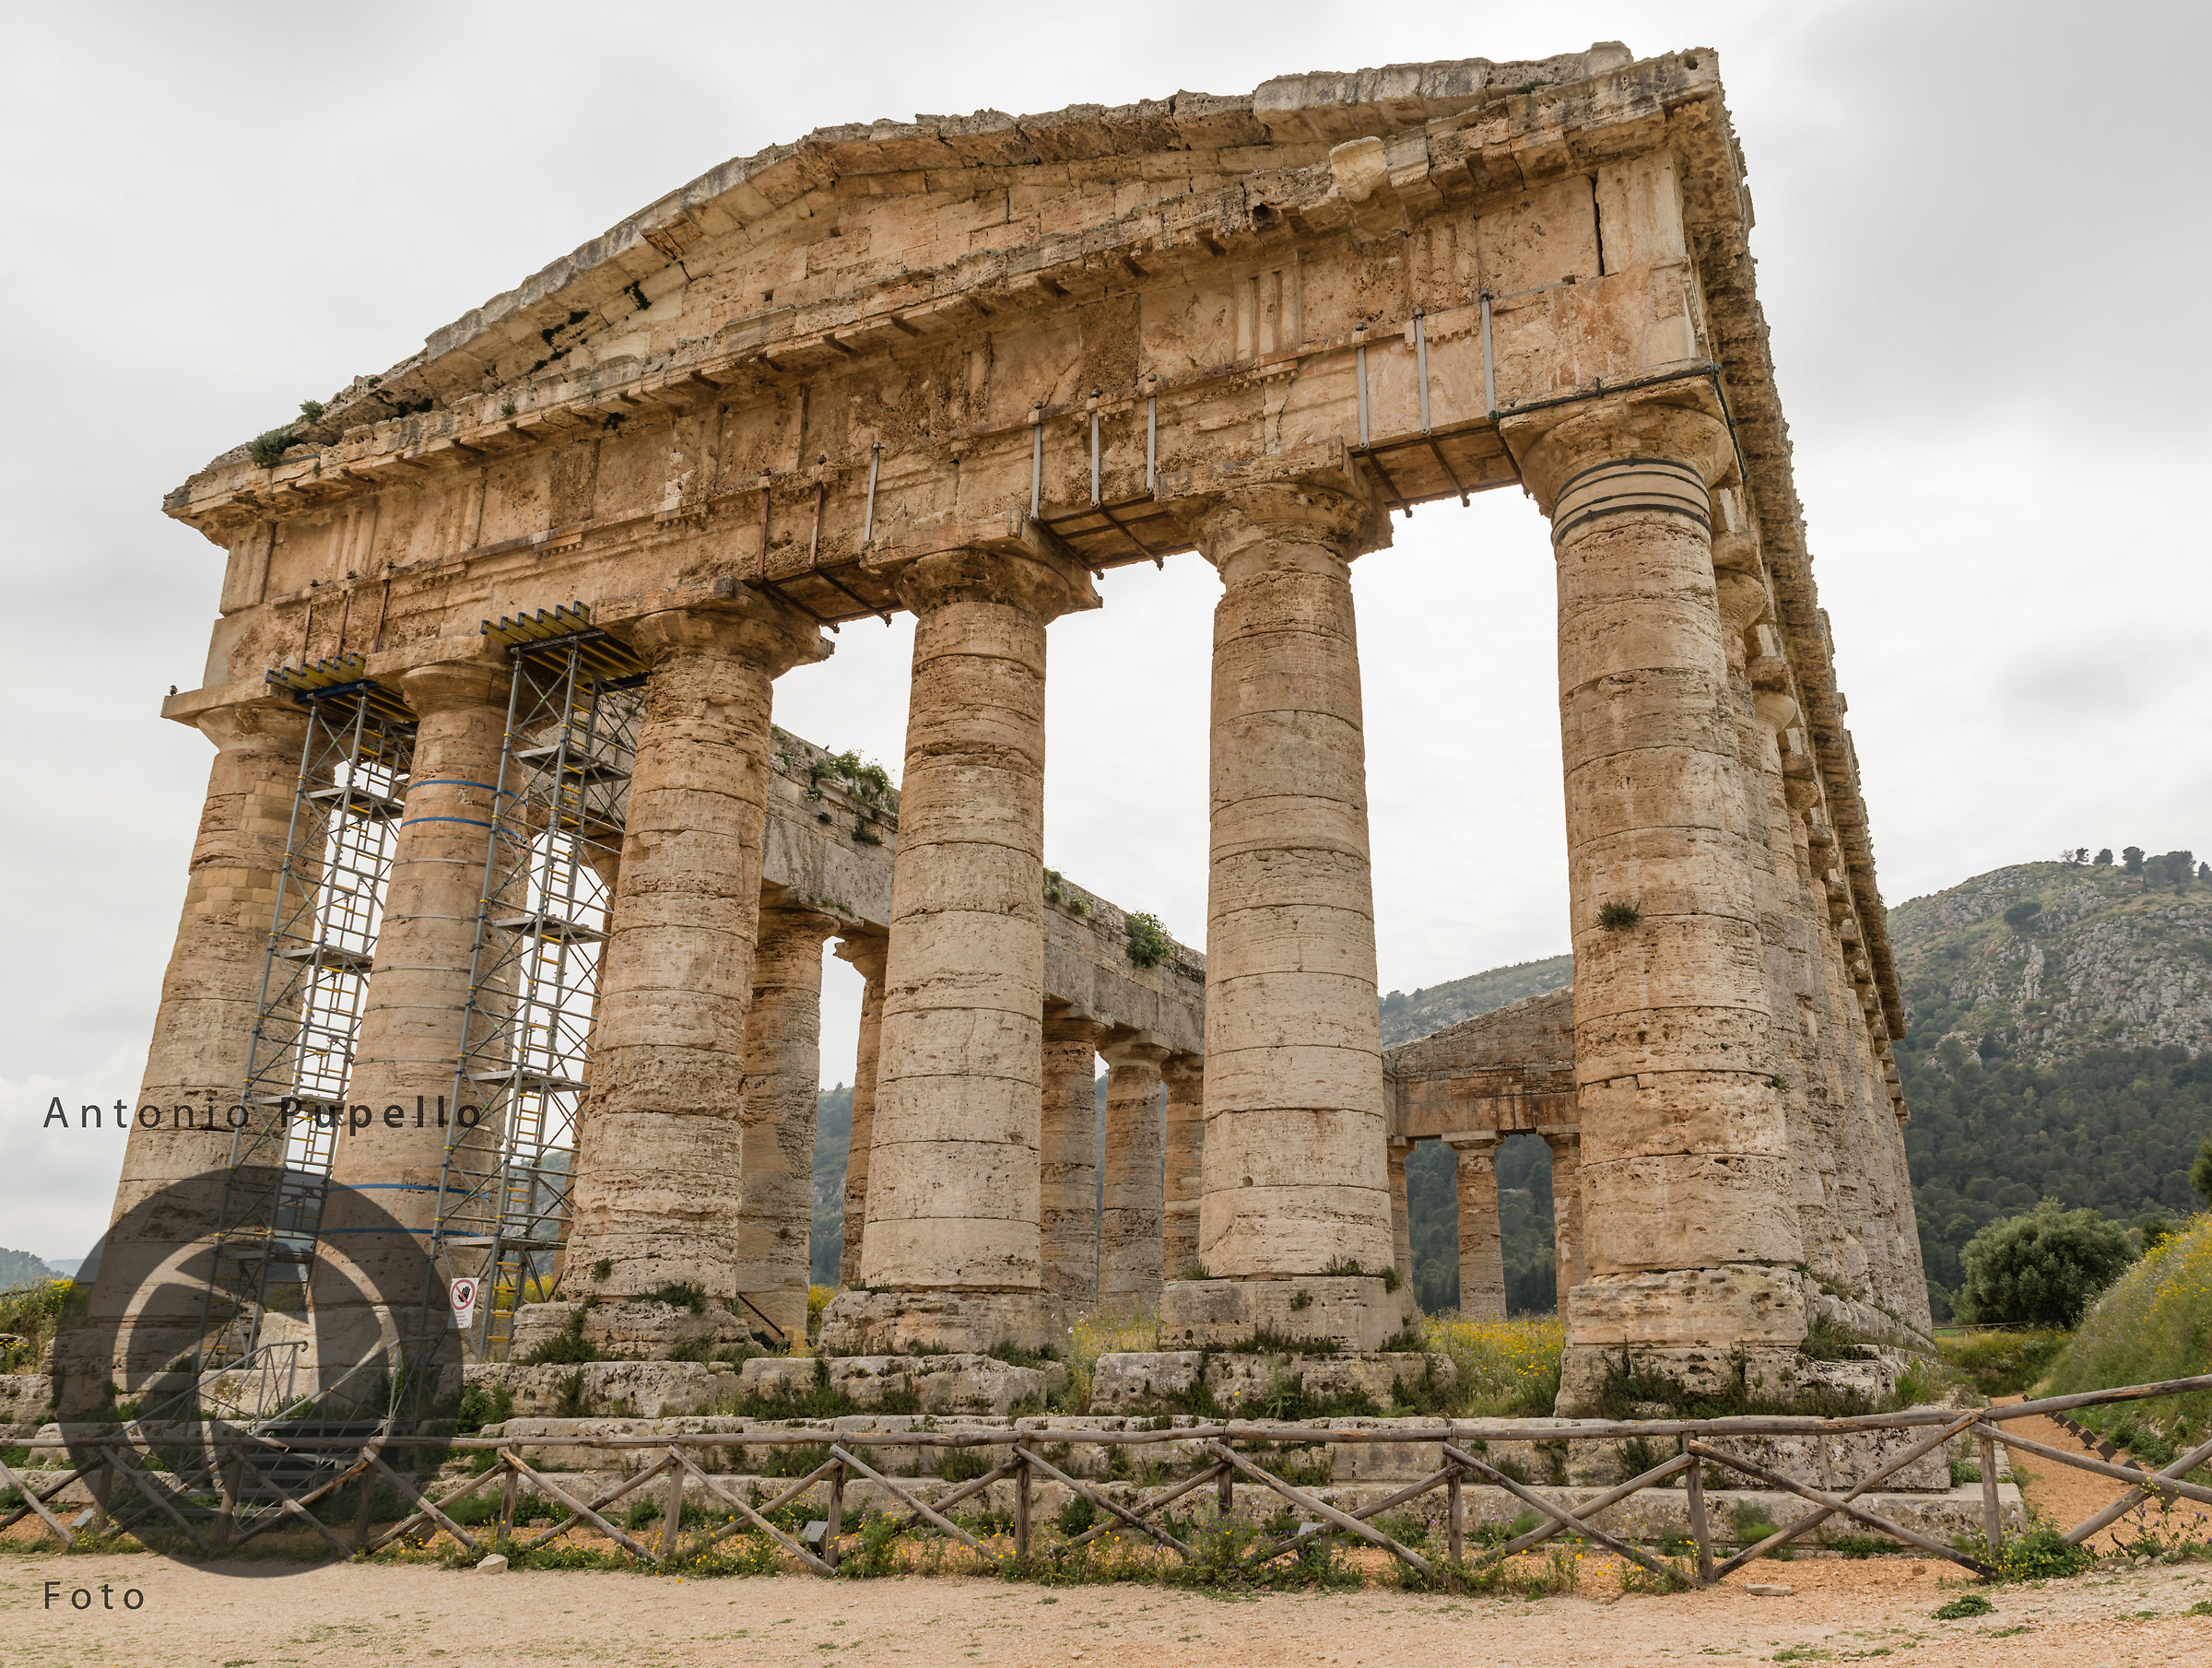 The temple at Segesta archaeological site...